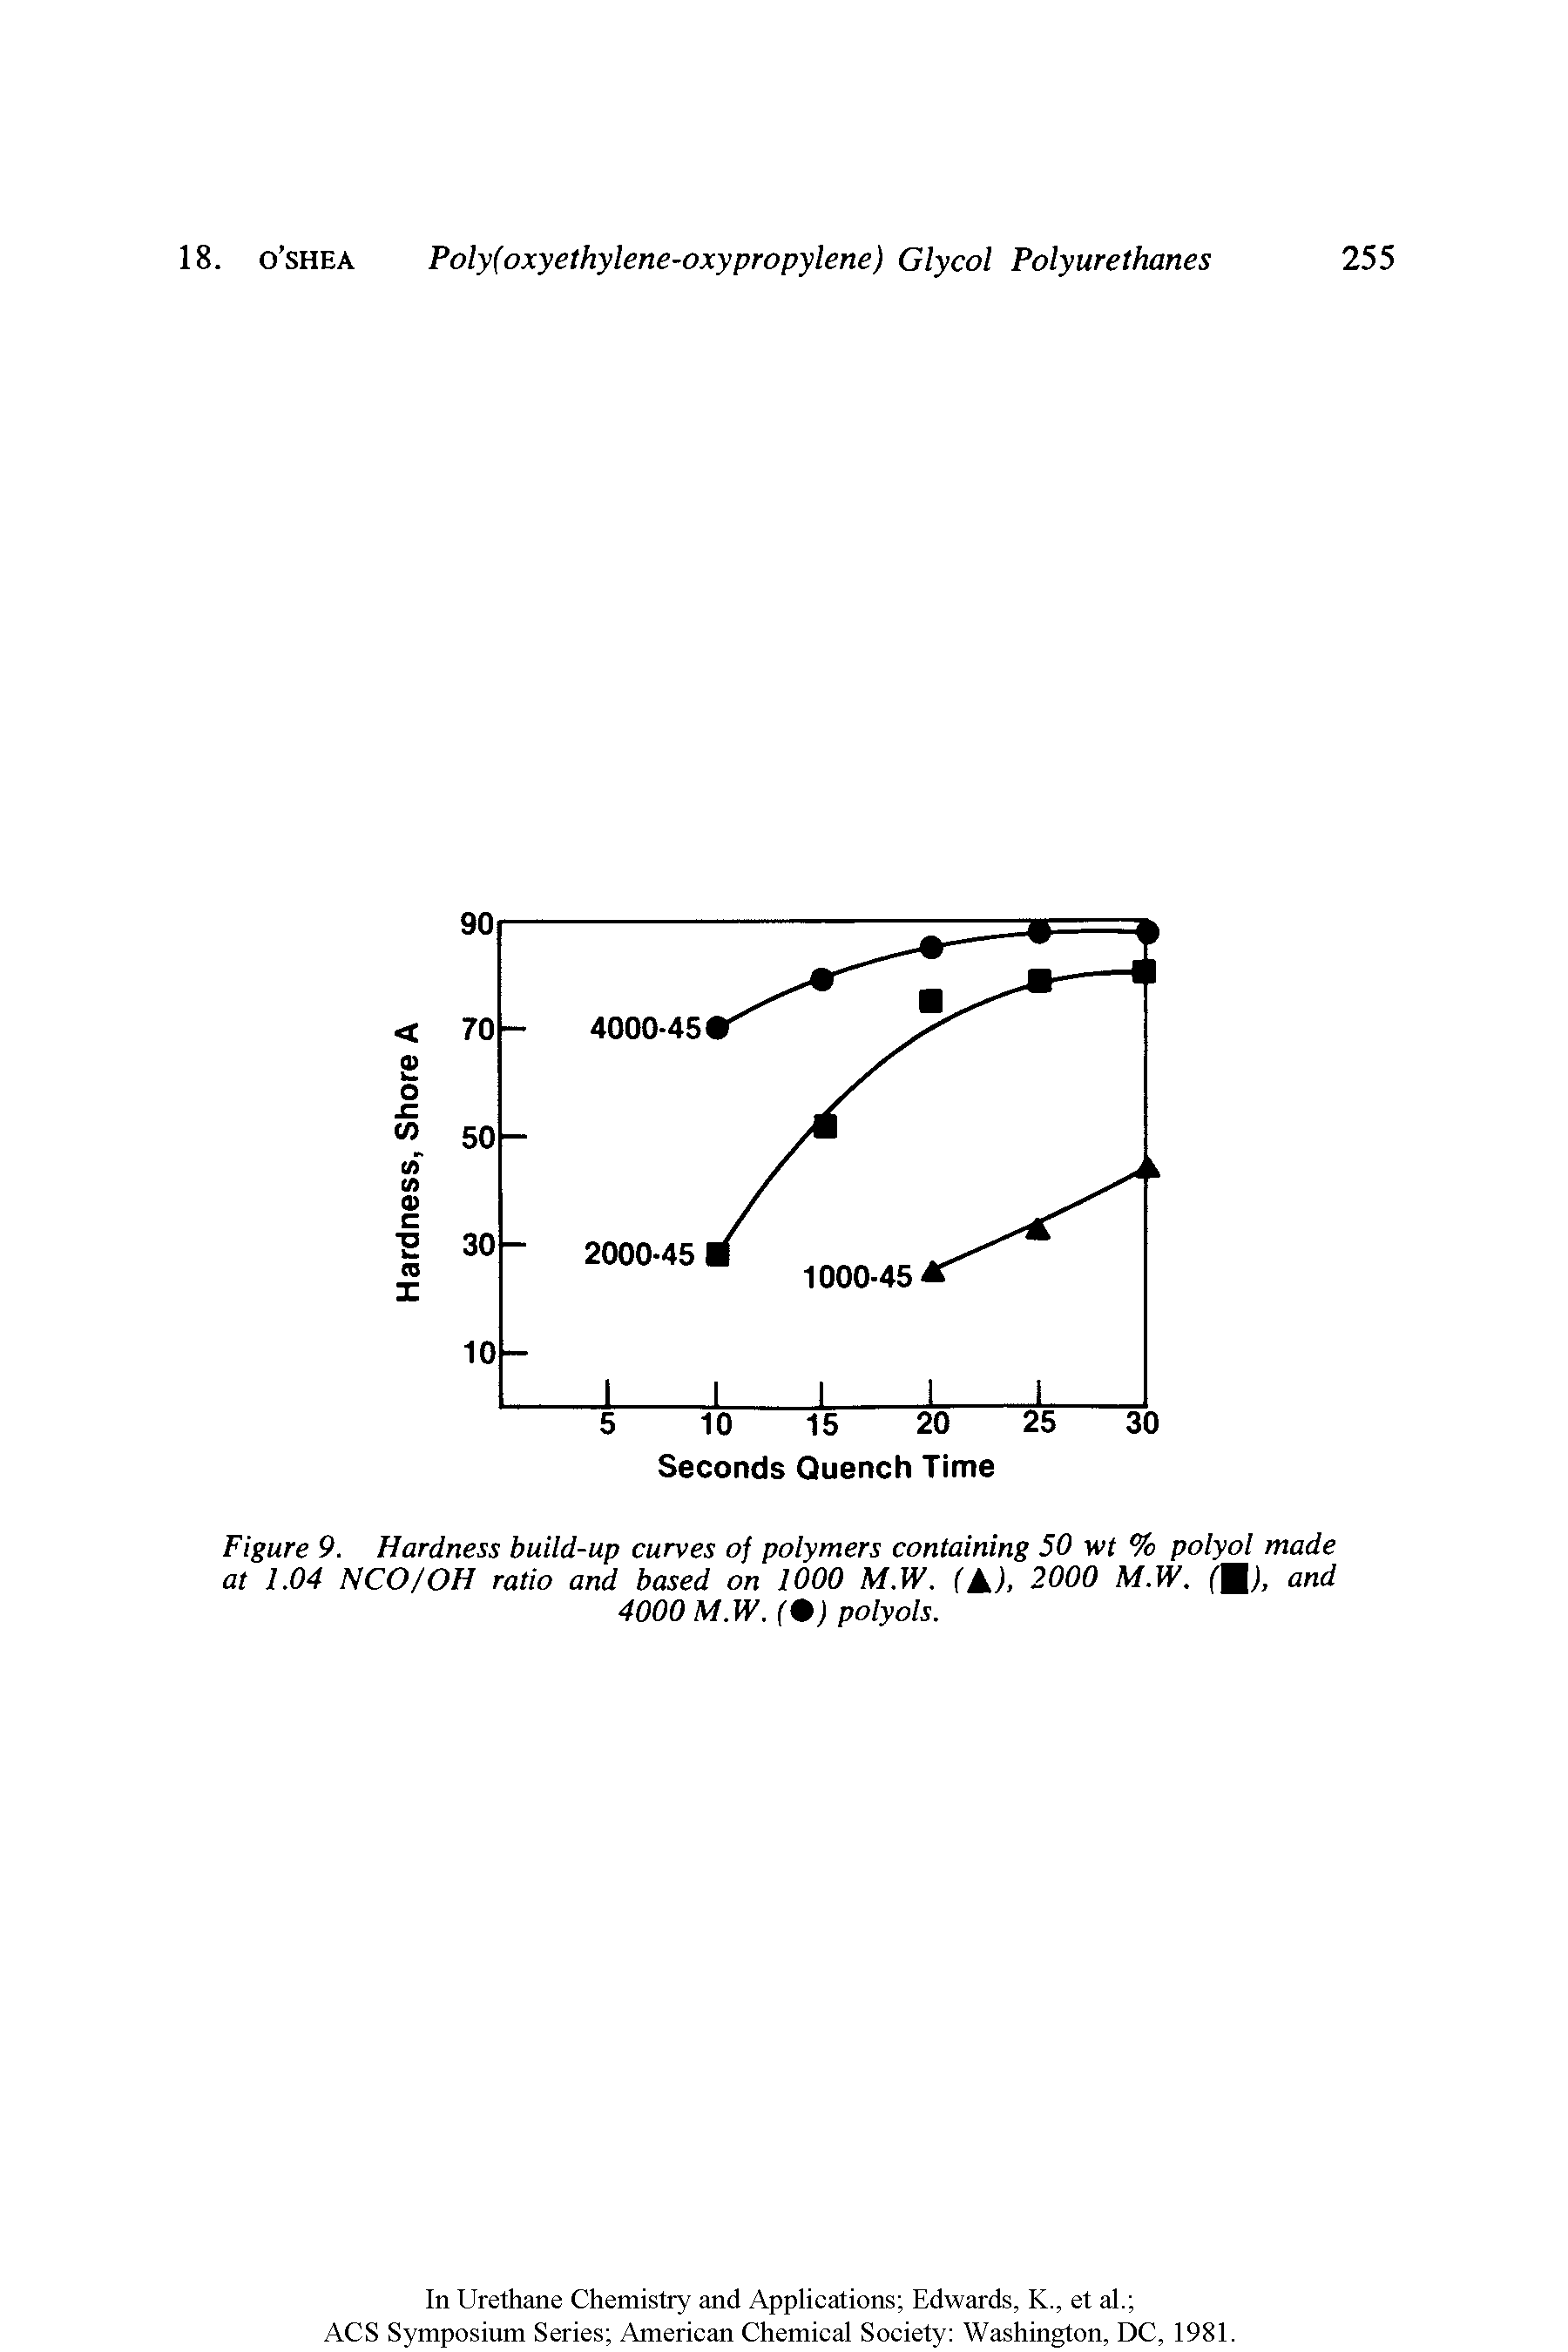 Figure 9. Hardness build-up curves of polymers containing 50 wt % polyol made at 1.04 NCO/OH ratio and based on 1000 M.W. (AJ. 2000 M.W. f J, and...